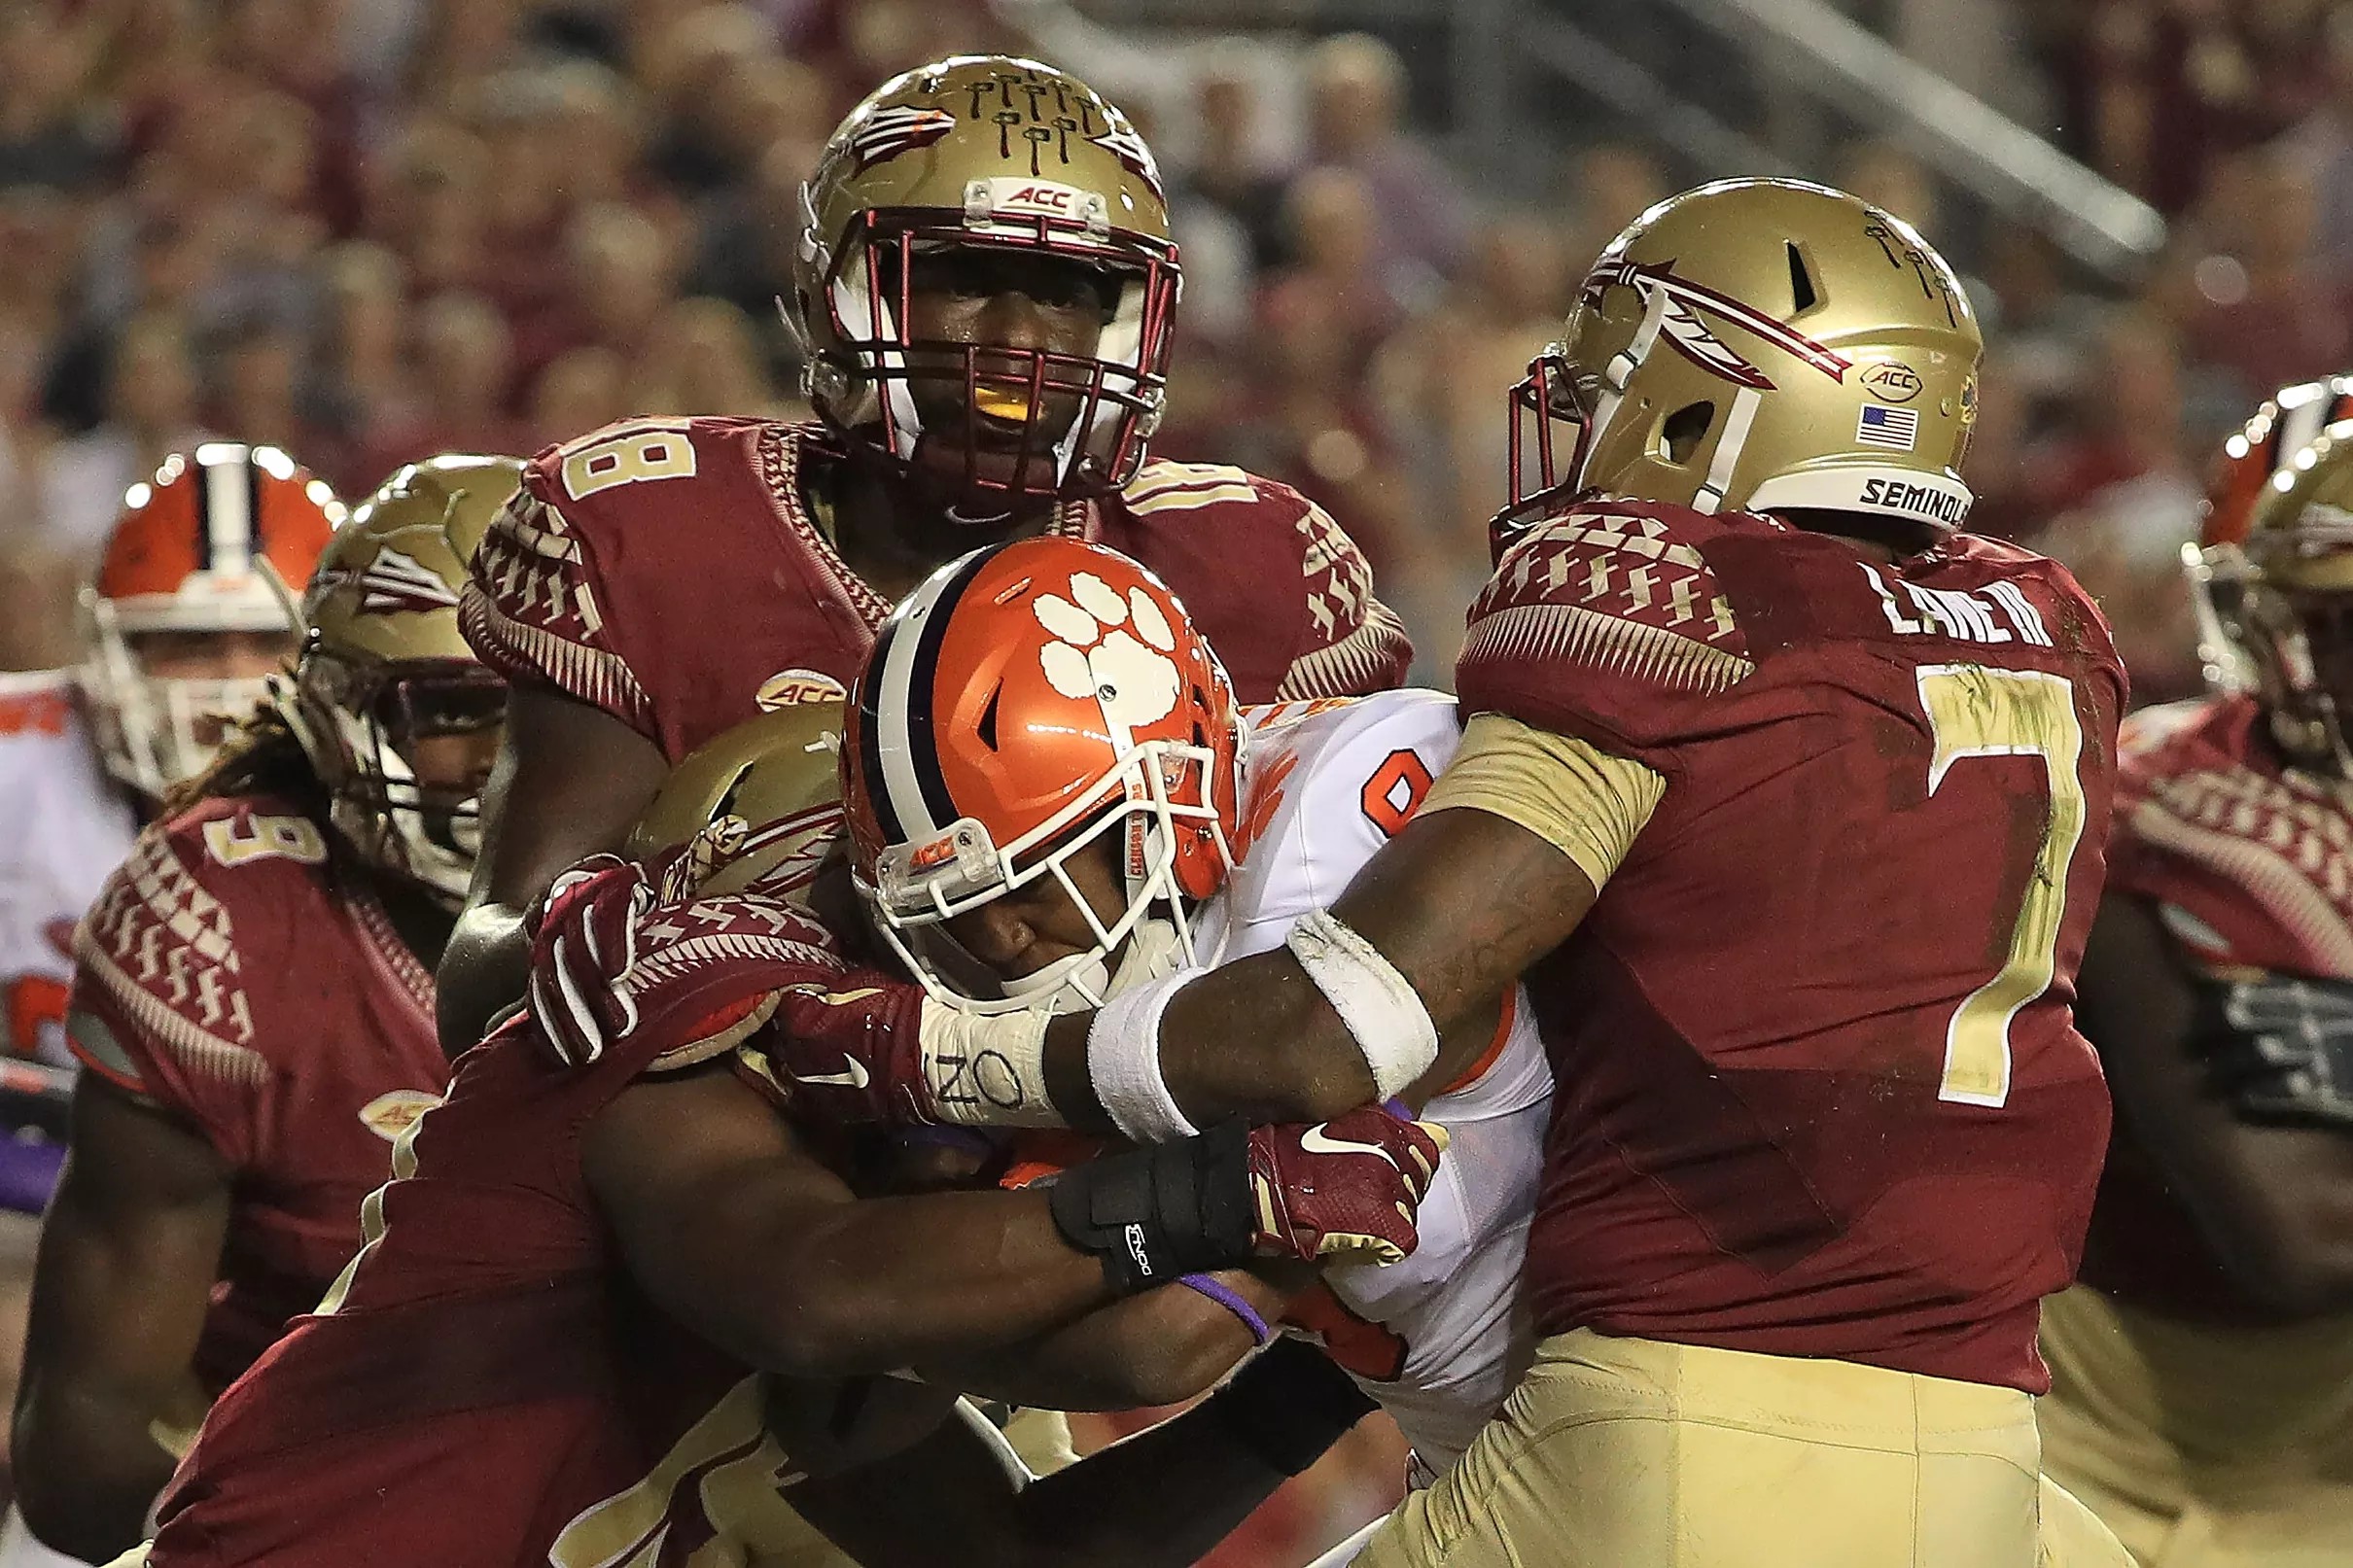 How to watch Florida State vs. Clemson